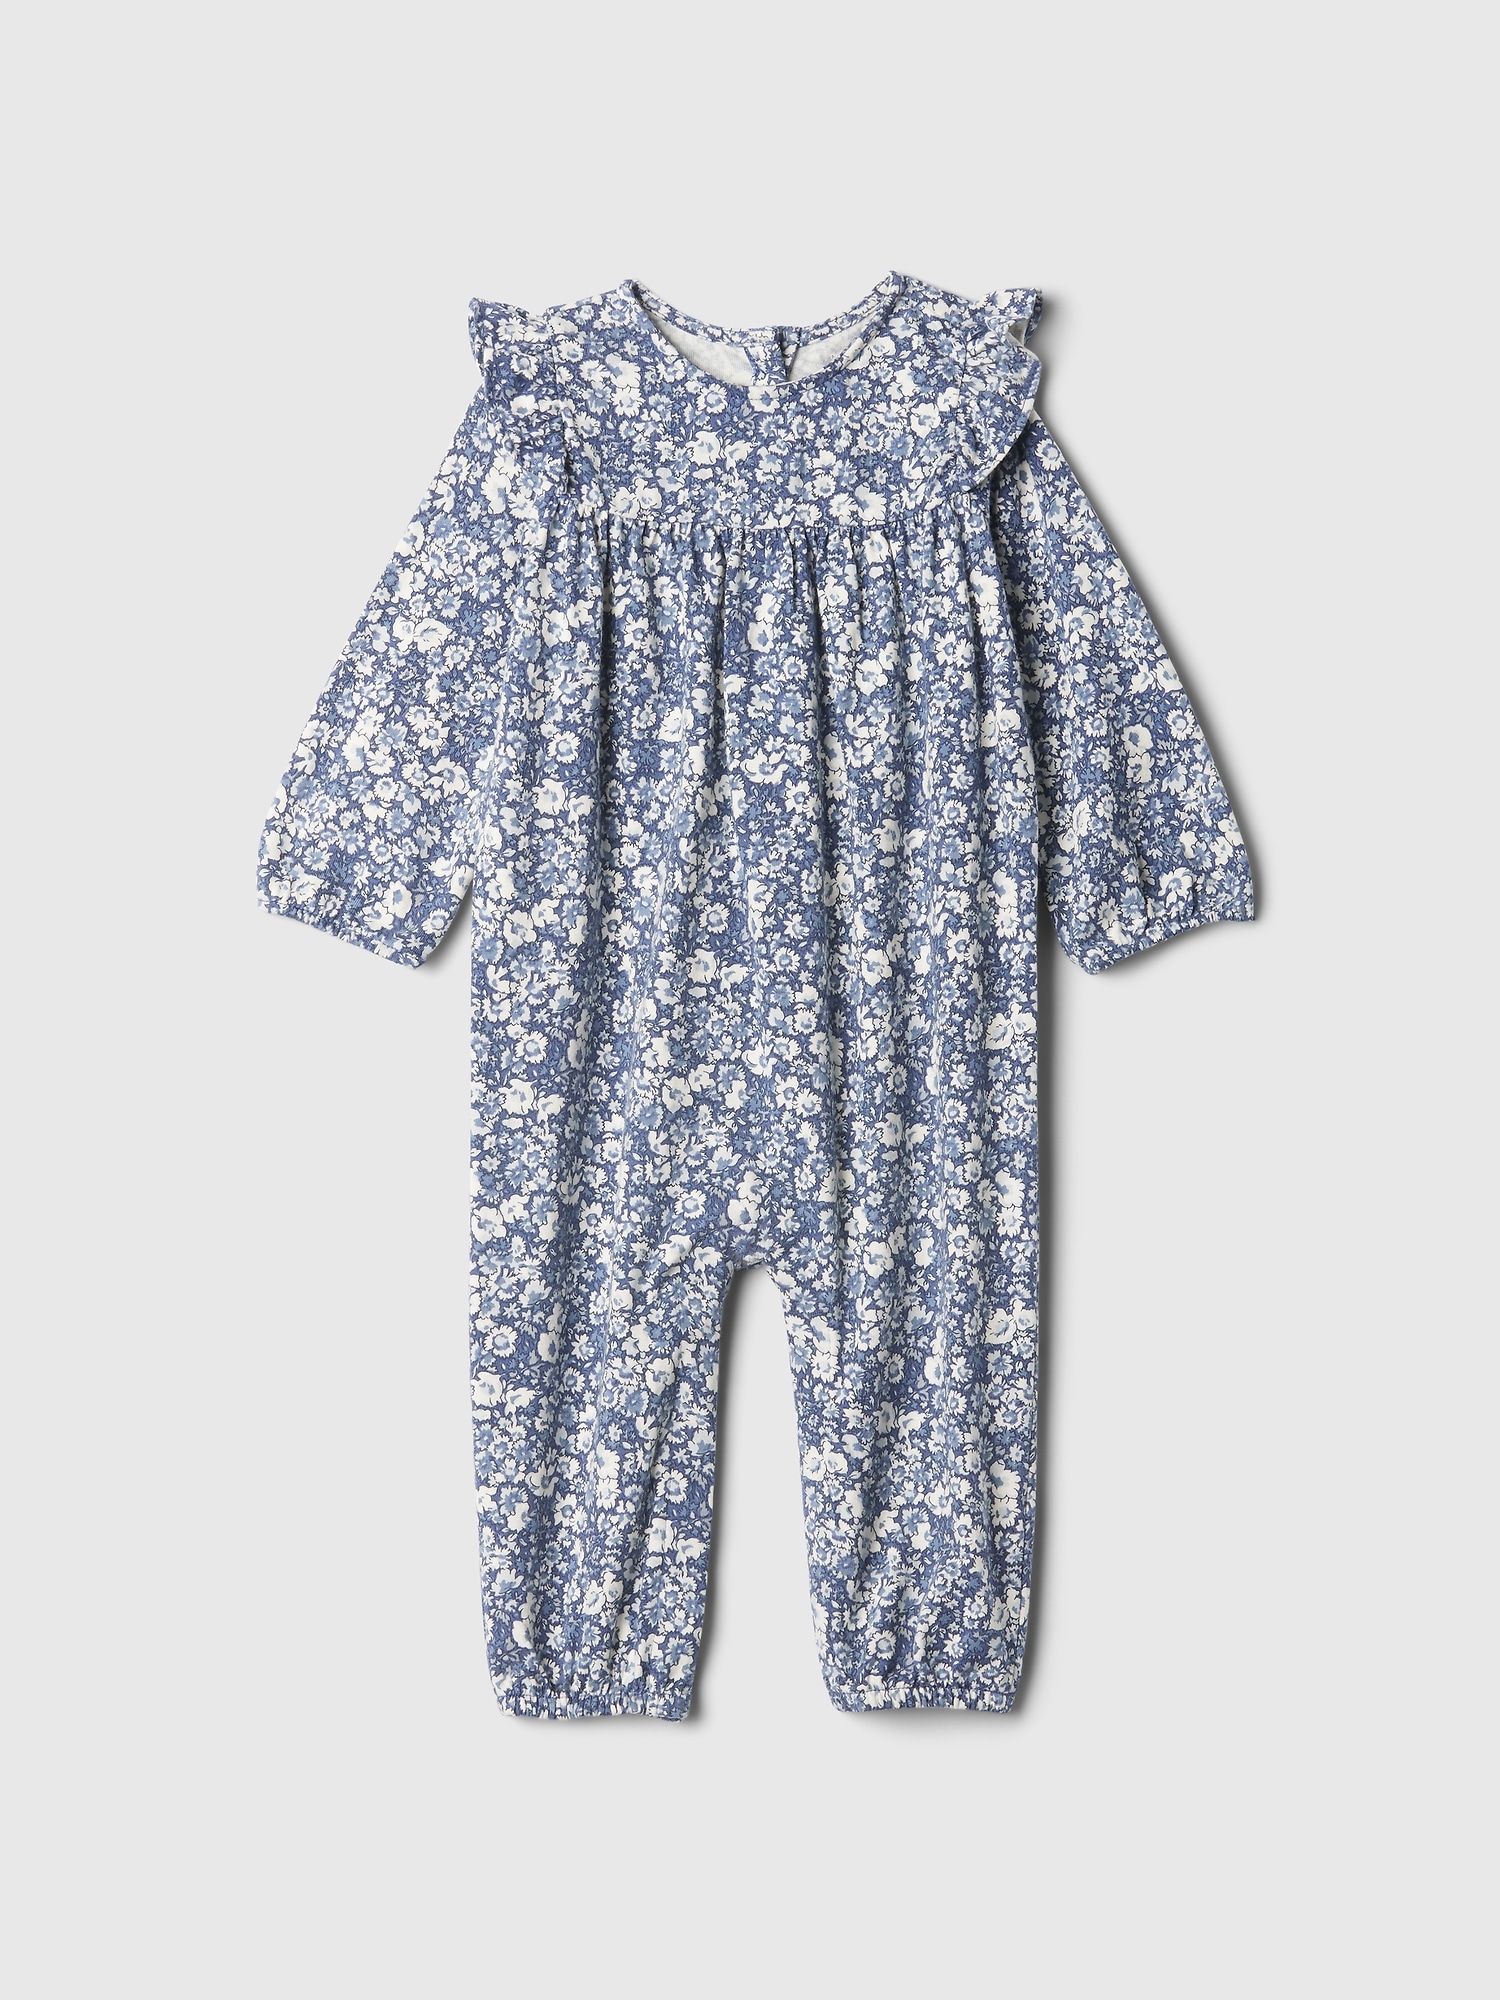 Baby Floral One-Piece